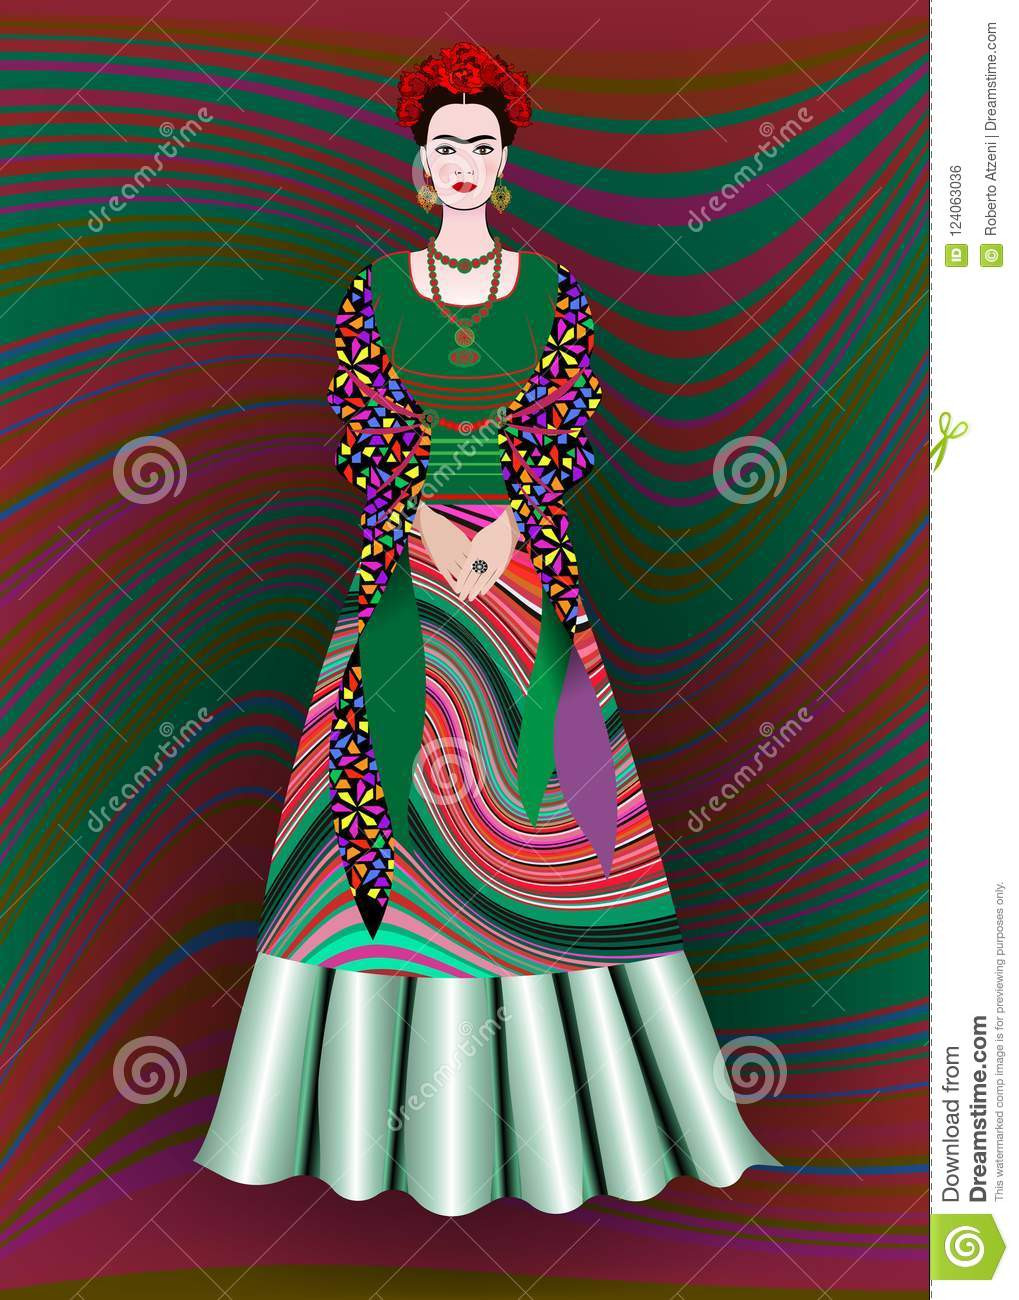 frida kahlo flower vase of frida kahlo vector portrait mexican woman with a traditional pertaining to frida kahlo vector portrait mexican woman with a traditional hairstyle mexican crafts jewelry and